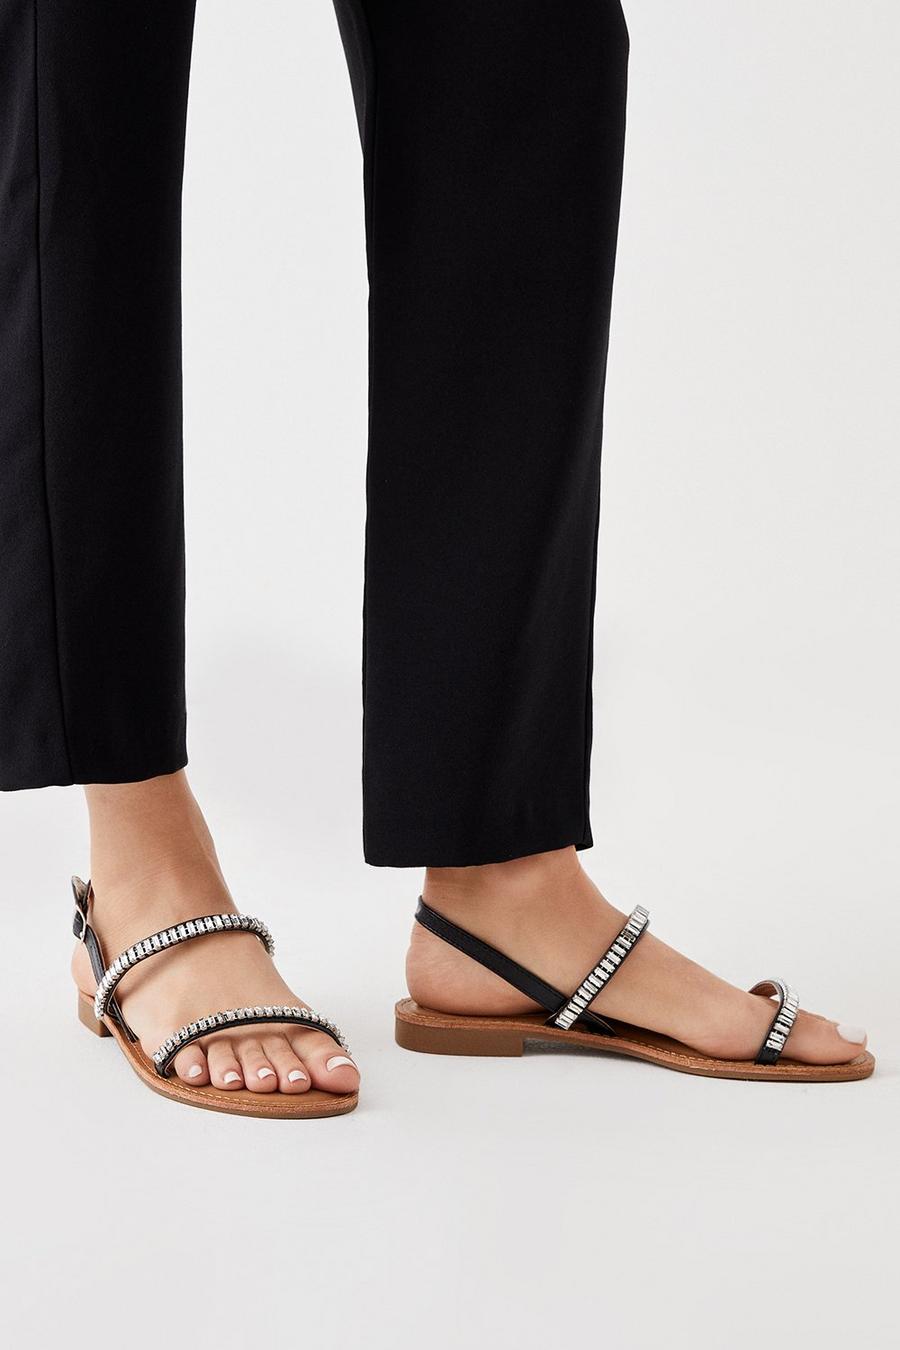 Faith: Mimi Sparkly Barely There Flat Sandals